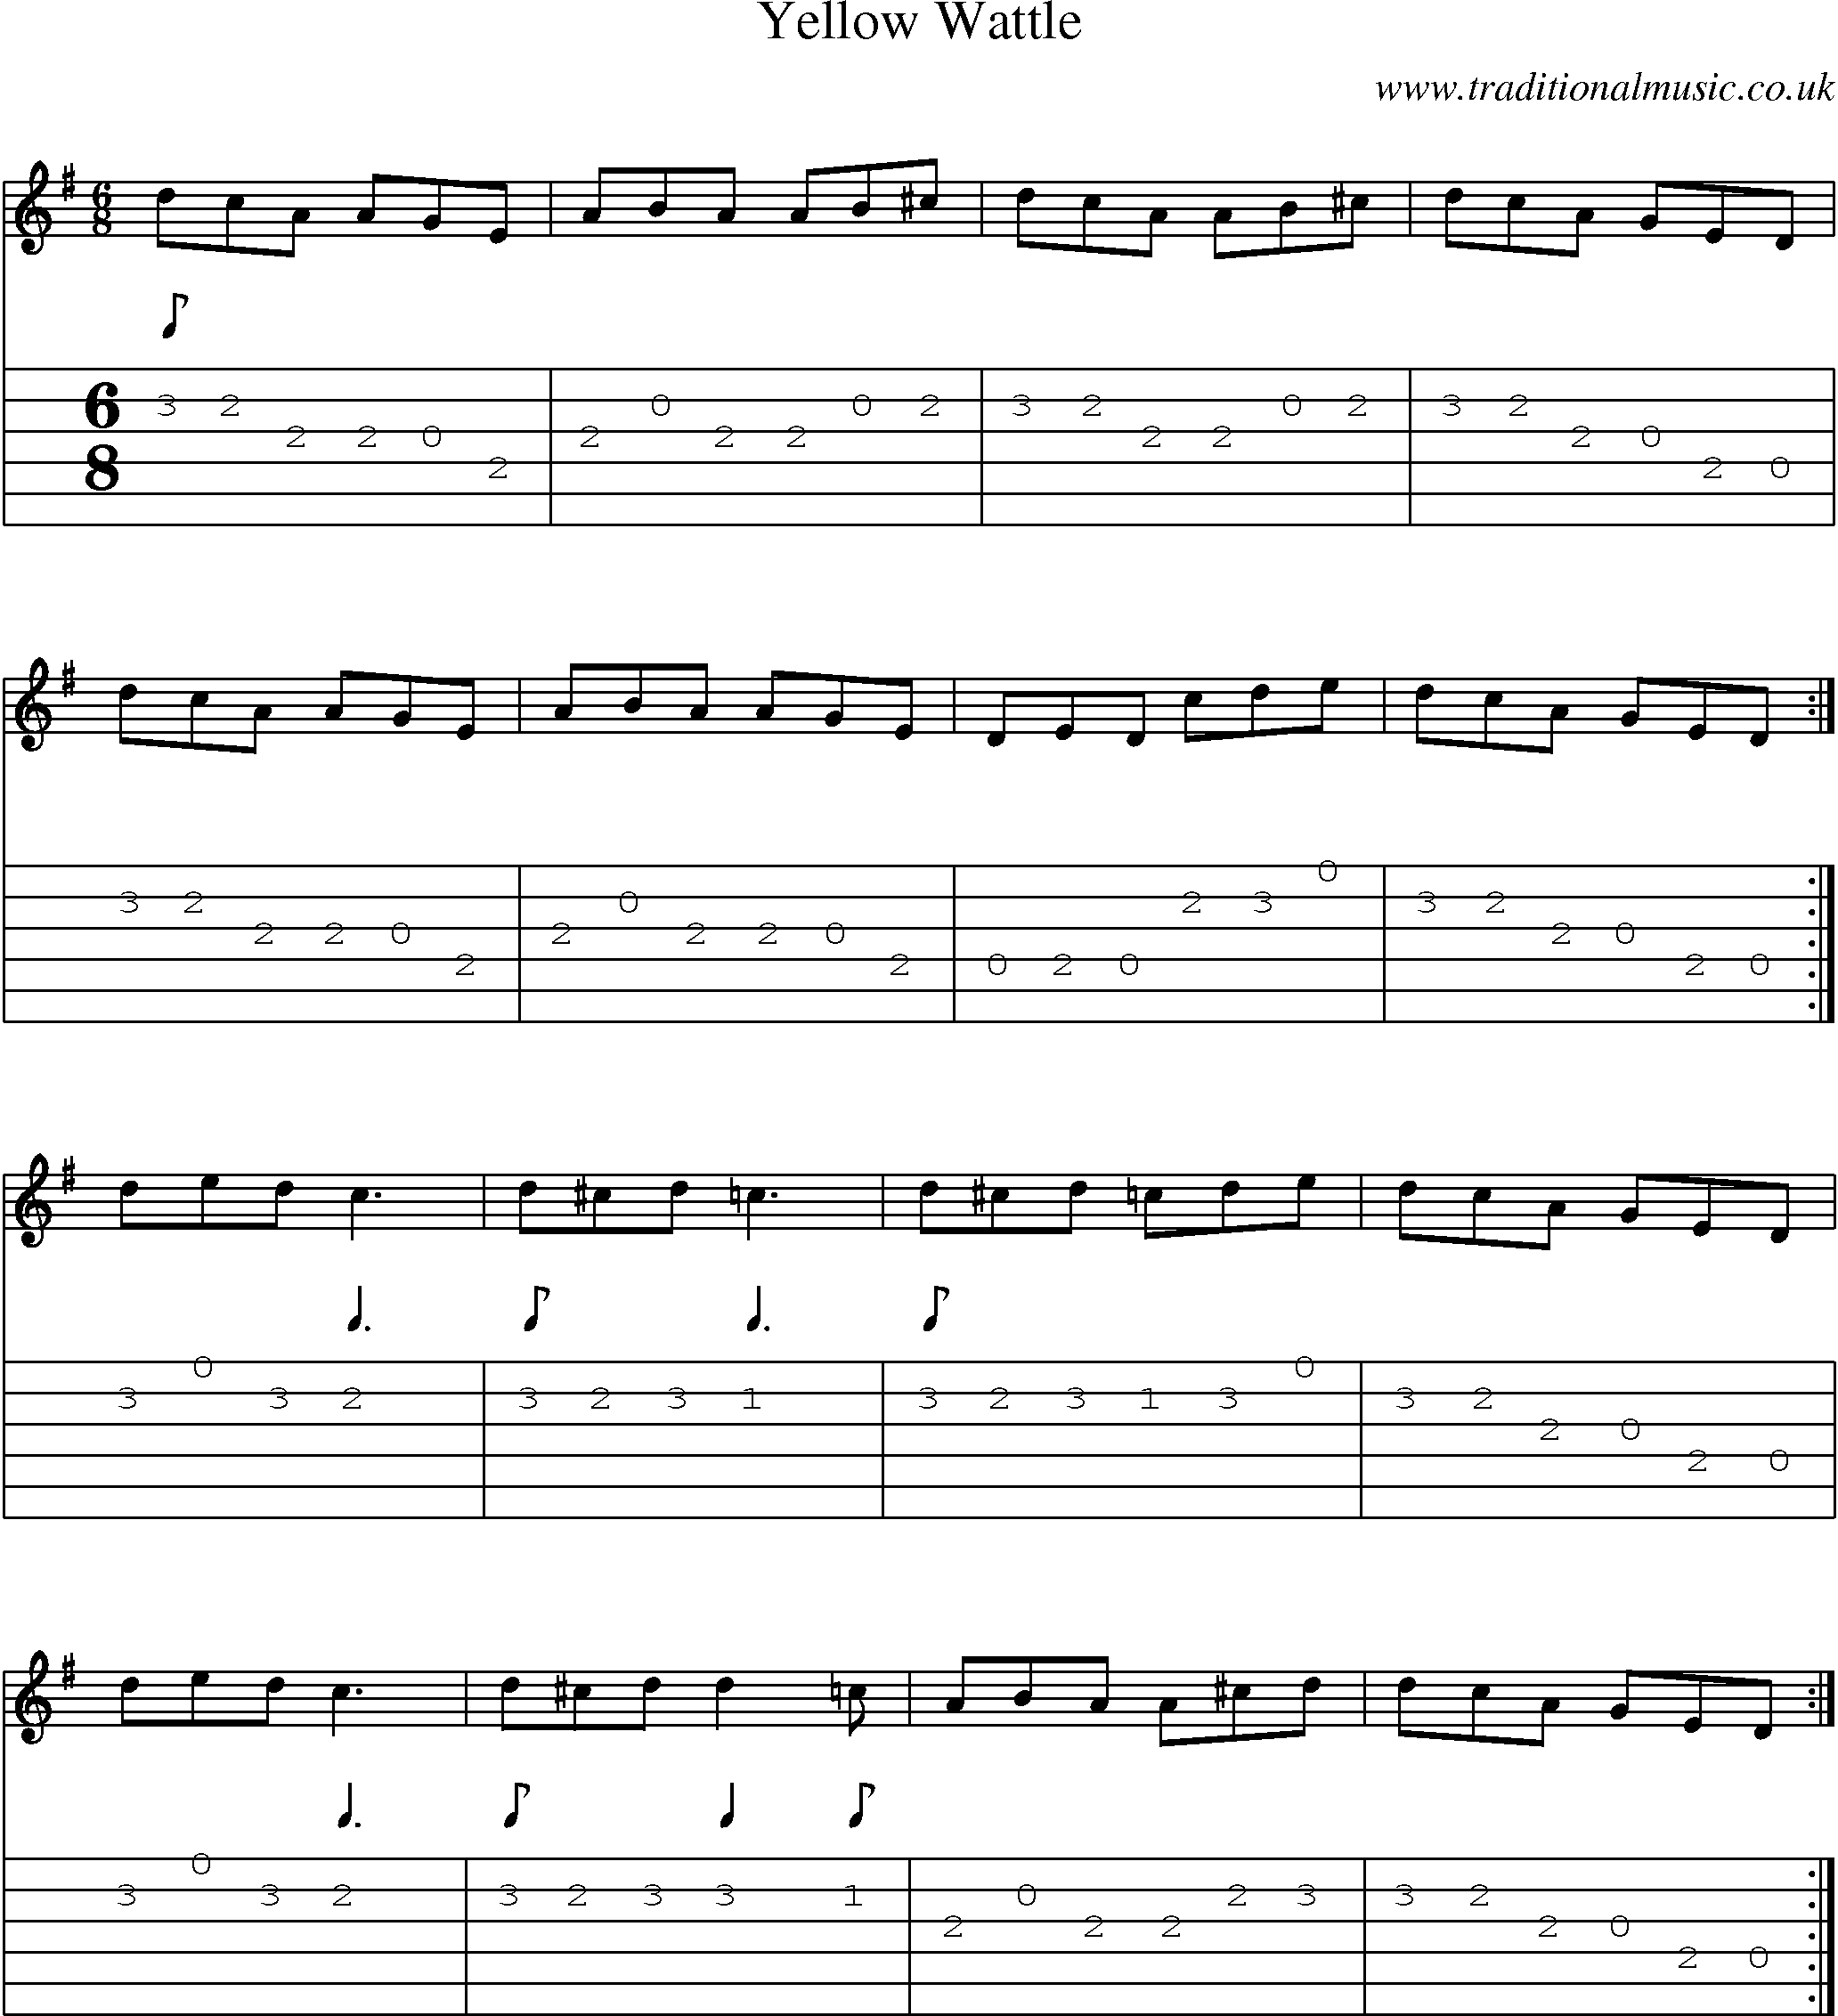 Music Score and Guitar Tabs for Yellow Wattle